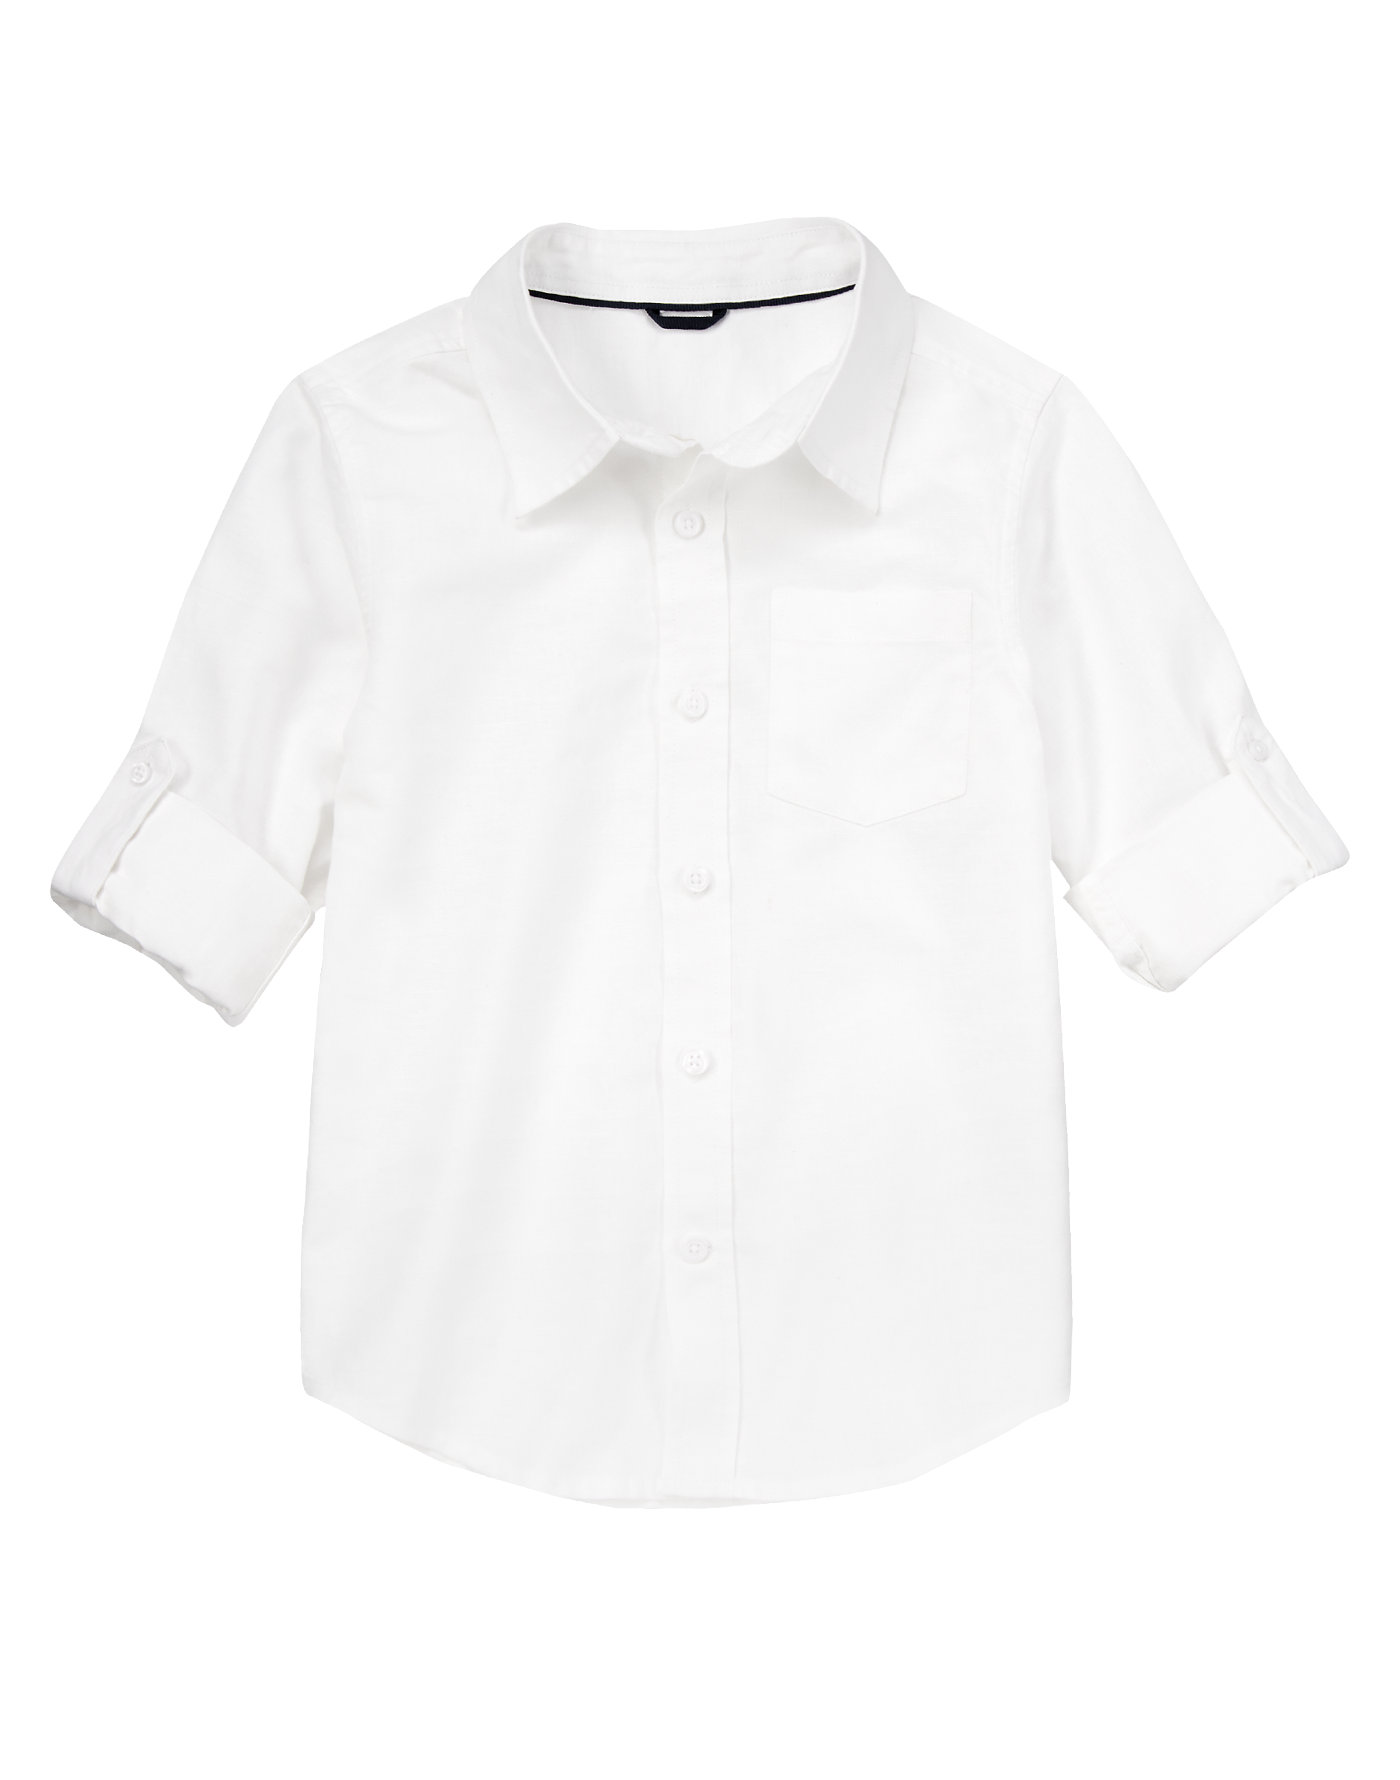 Baby White Button Shirt by Gymboree